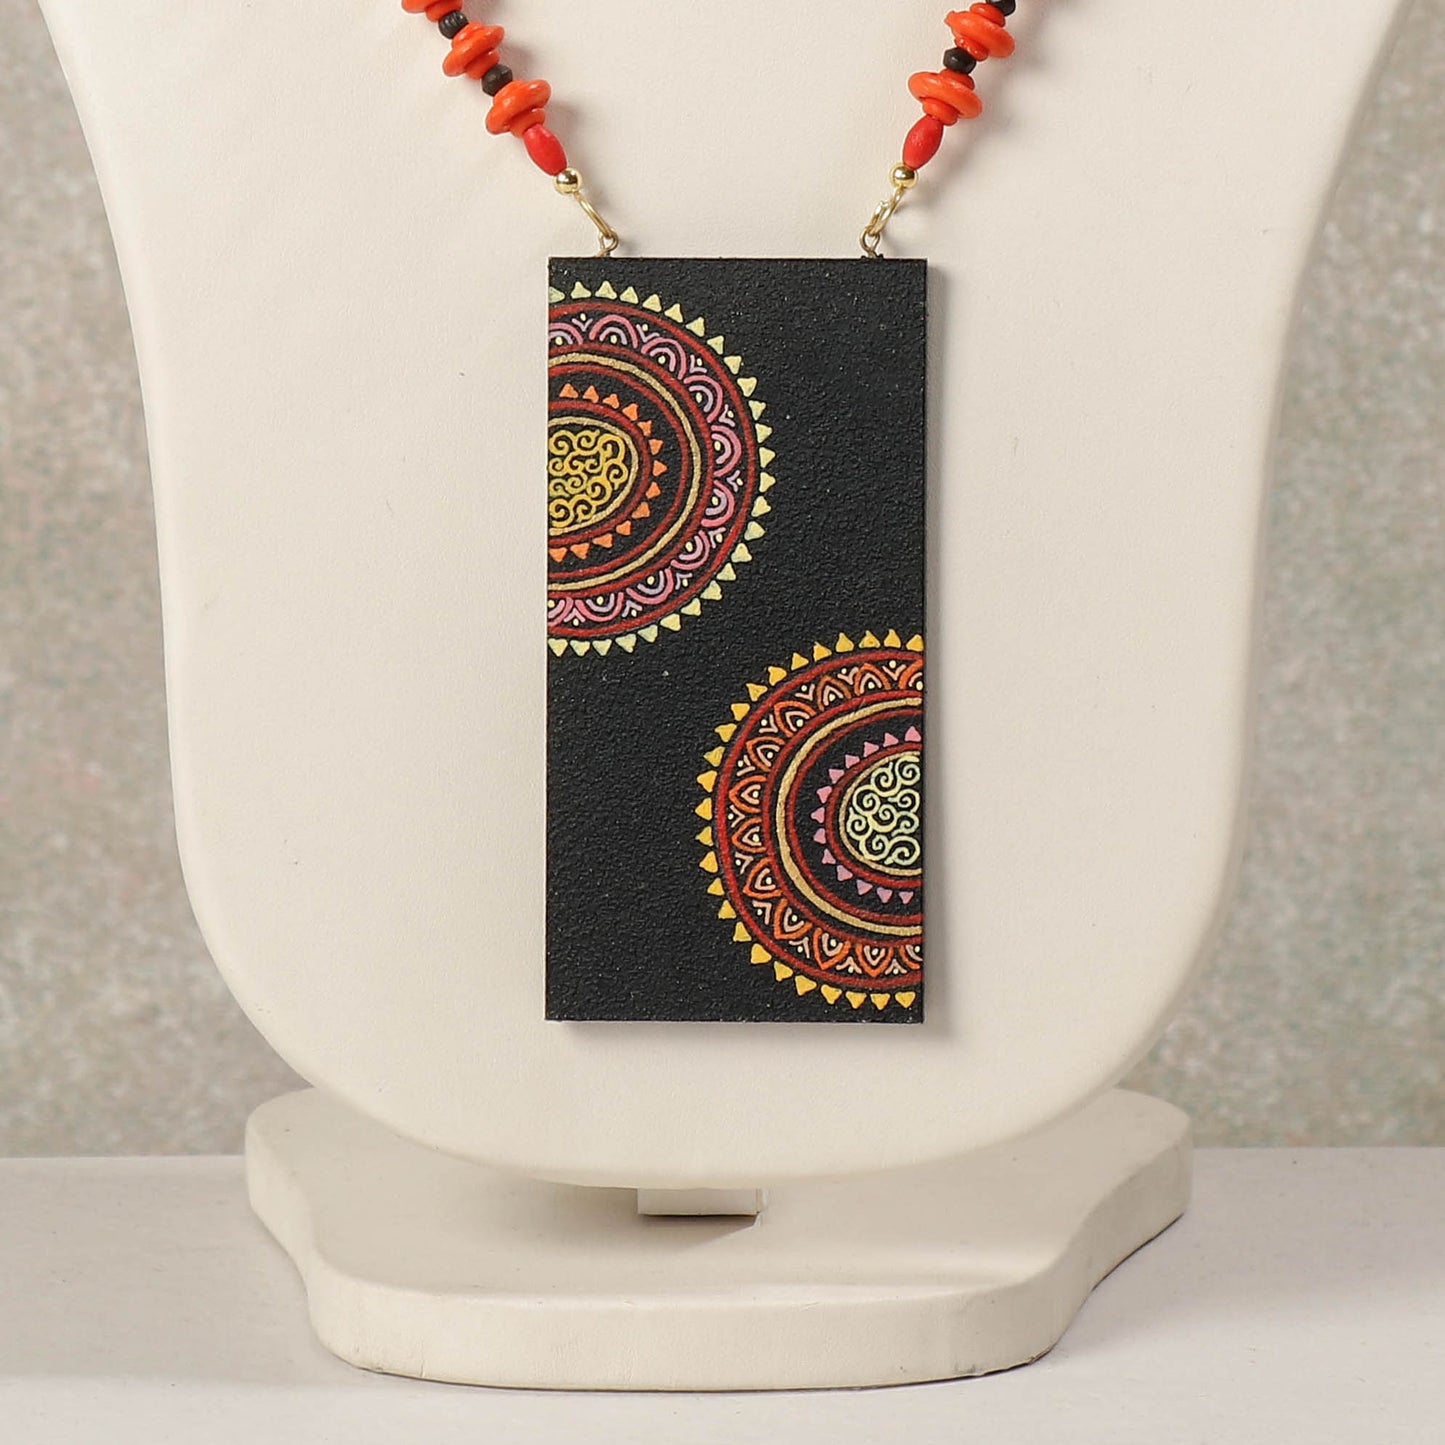 Miniature Handpainted Wooden Necklace With Beads